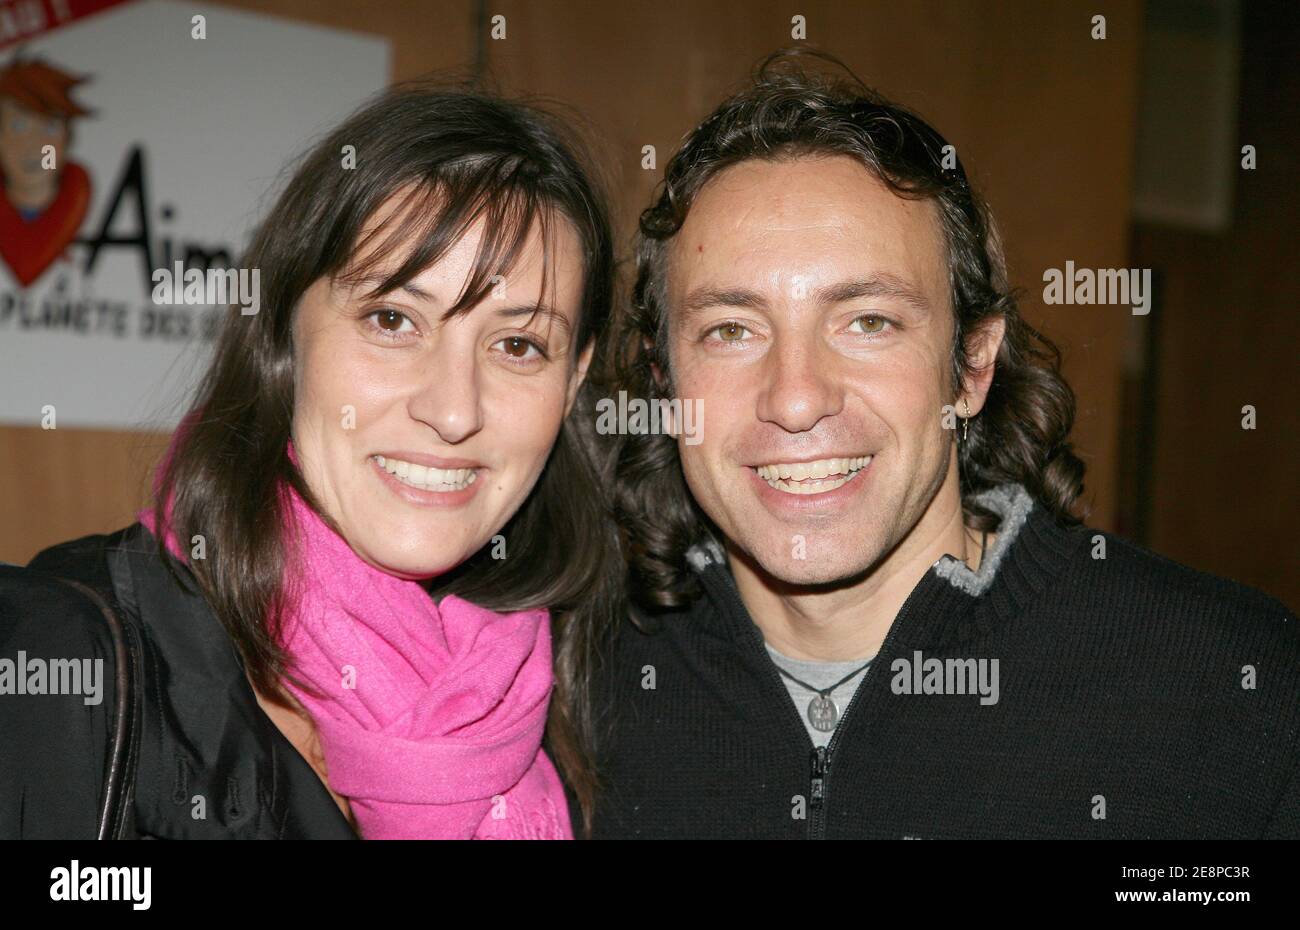 Philippe Candeloro and his wife Olivia pose during the press conference of 'Aime et la Planete des Signes' to benefit of 'La Chaine de l'Espoir' association held at the Rond Point Theatre on Champs Elysees in Paris, France on September 28, 2007. Photo by Denis Guignebourg/ABACAPRESS.COM Stock Photo